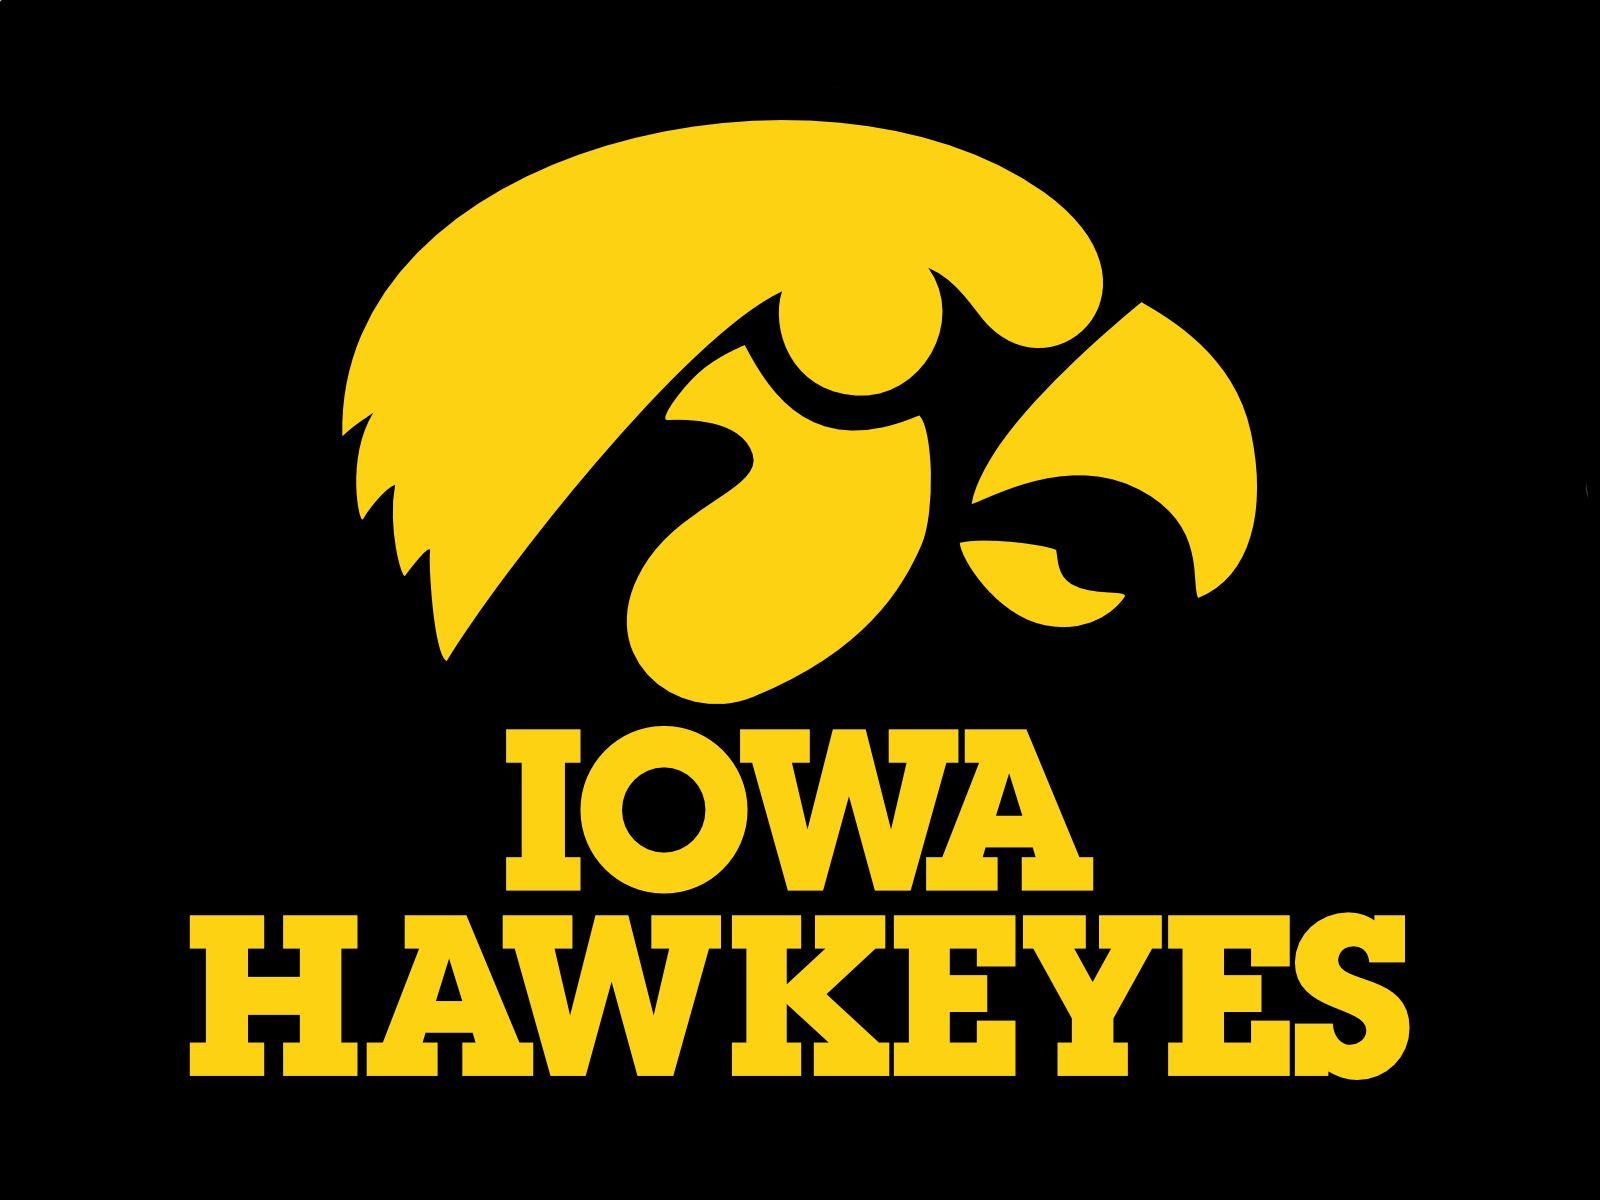 UIowa Logo - Iowa Hawkeyes Logo, Iowa Hawkeyes Symbol, Meaning, History and Evolution